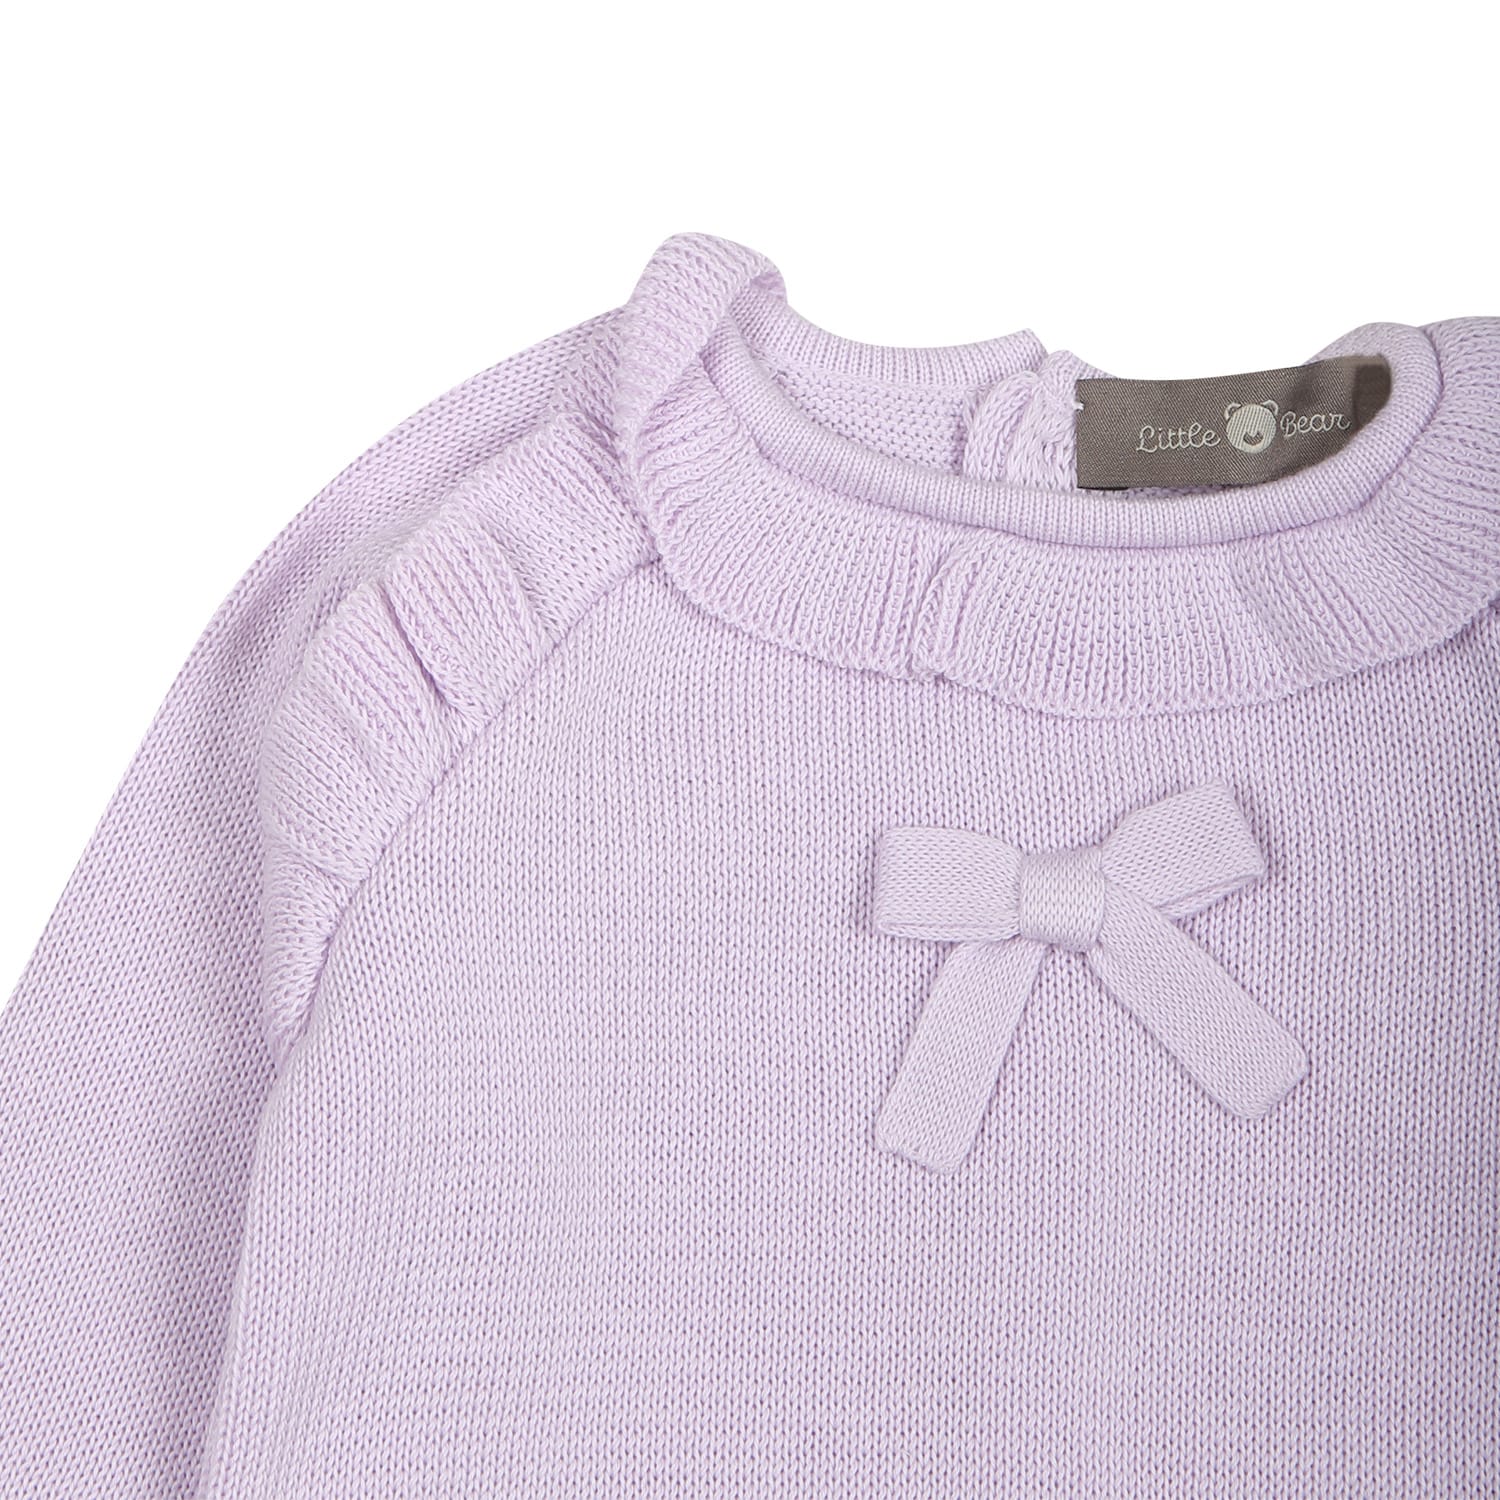 Shop Little Bear Wisteria Birth Suit For Baby Girl In Violet